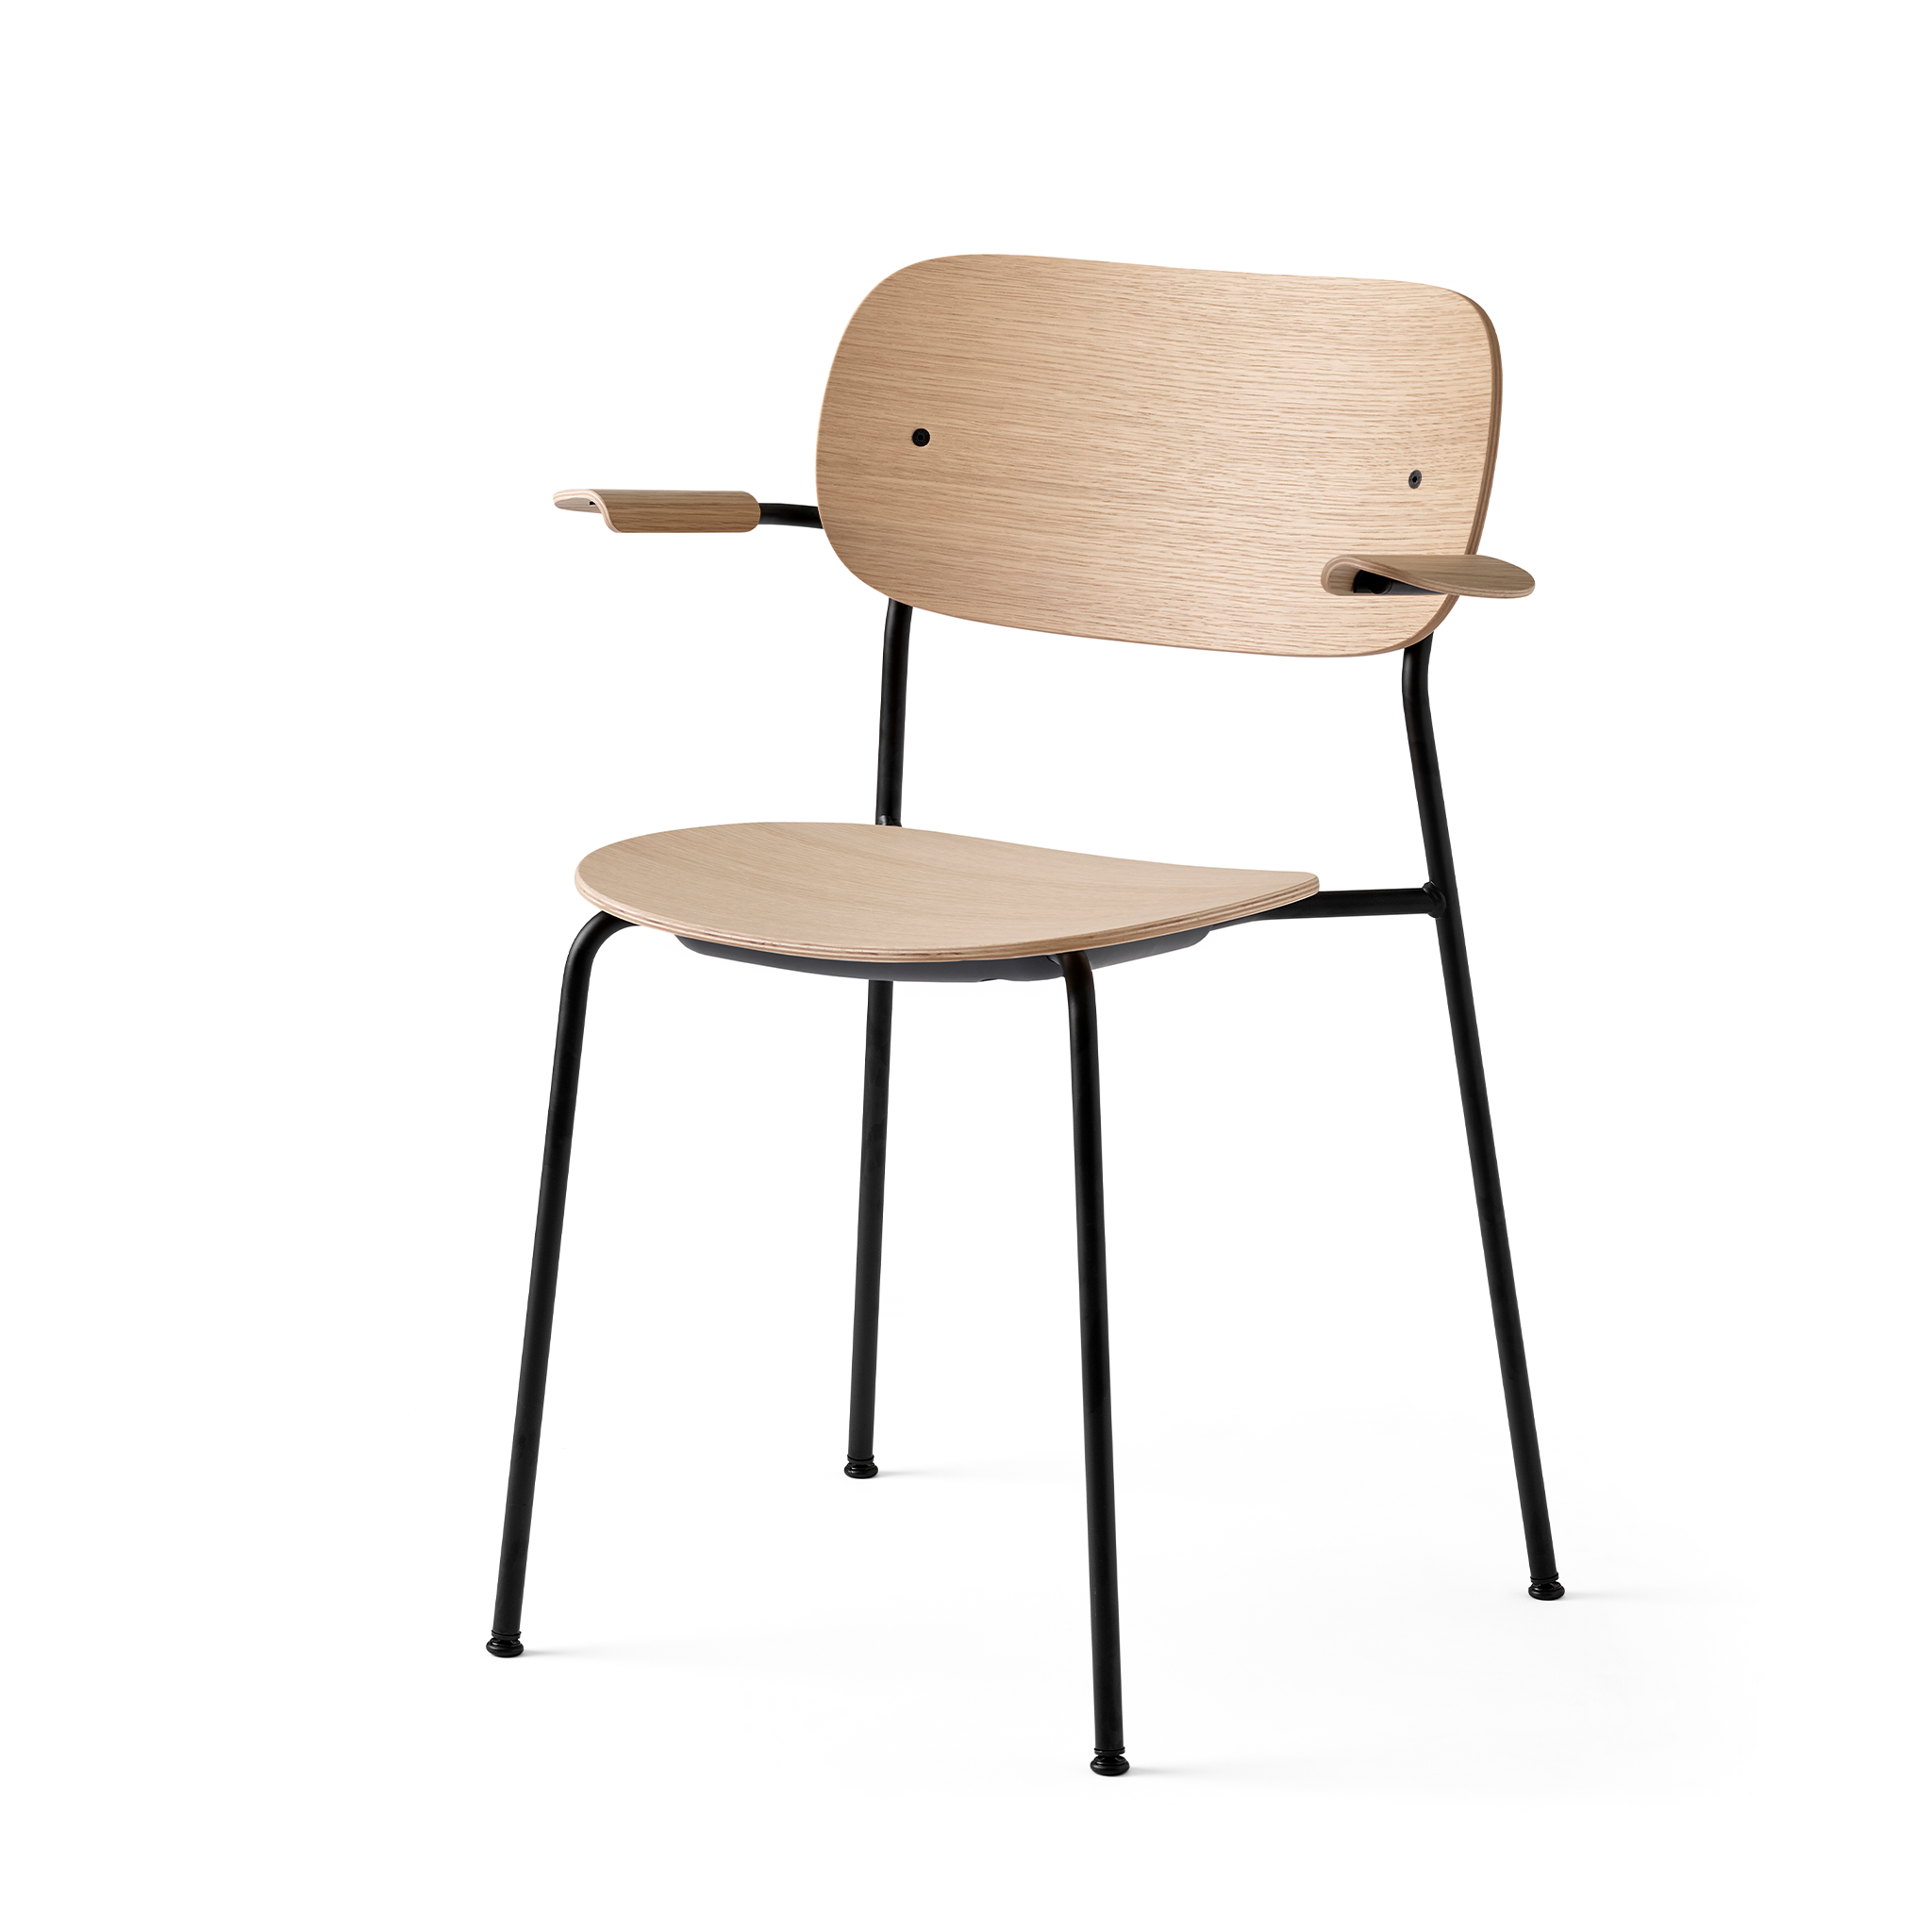 Co Chair, Un-Upholstered With Armrests by Norm Architects & Els Van Hoorebeeck for Menu